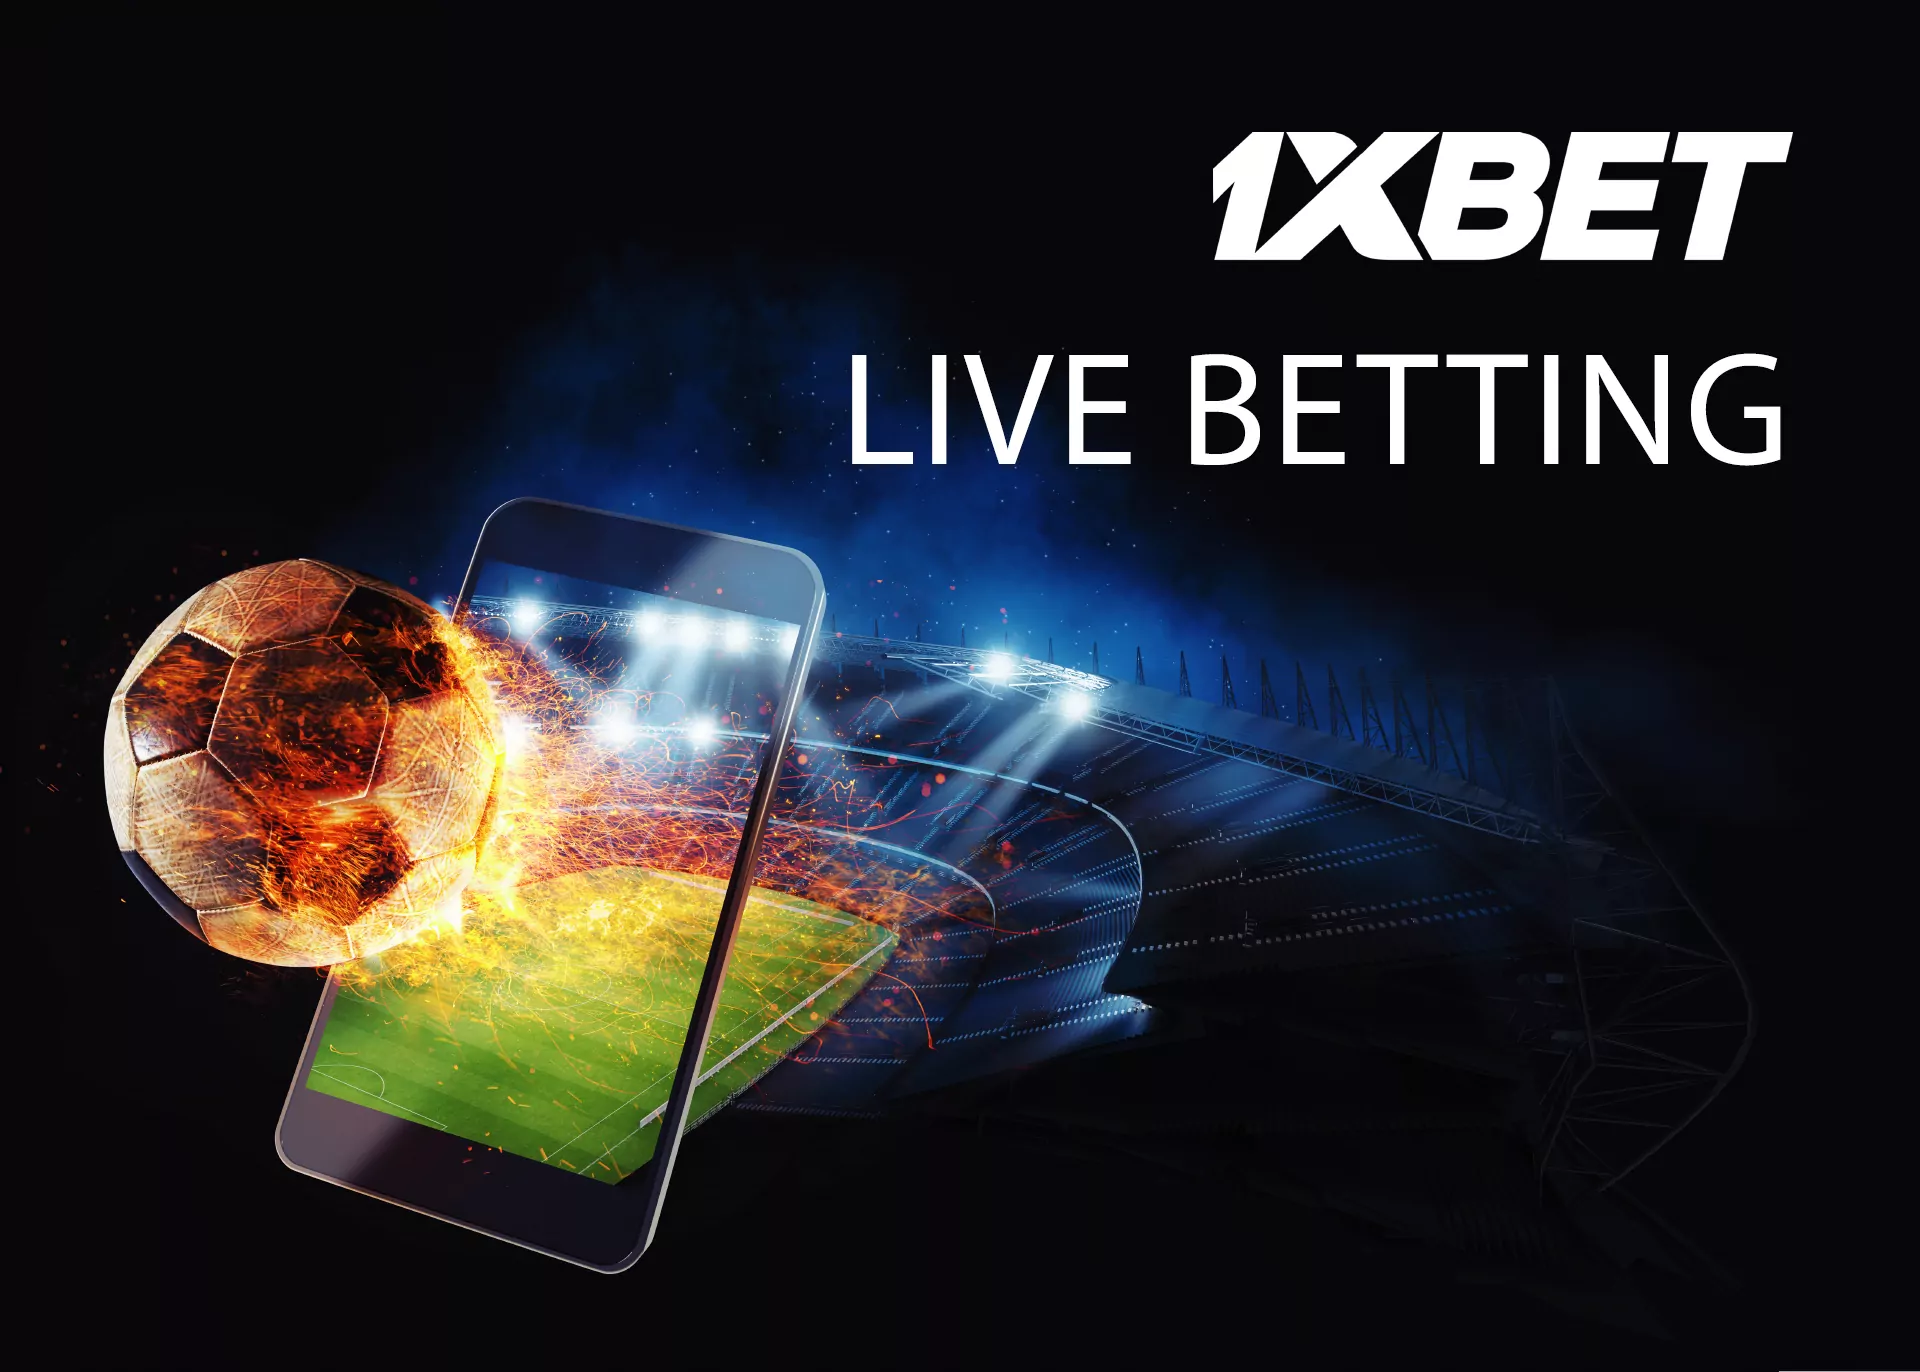 1xBet users can bet in live mode.